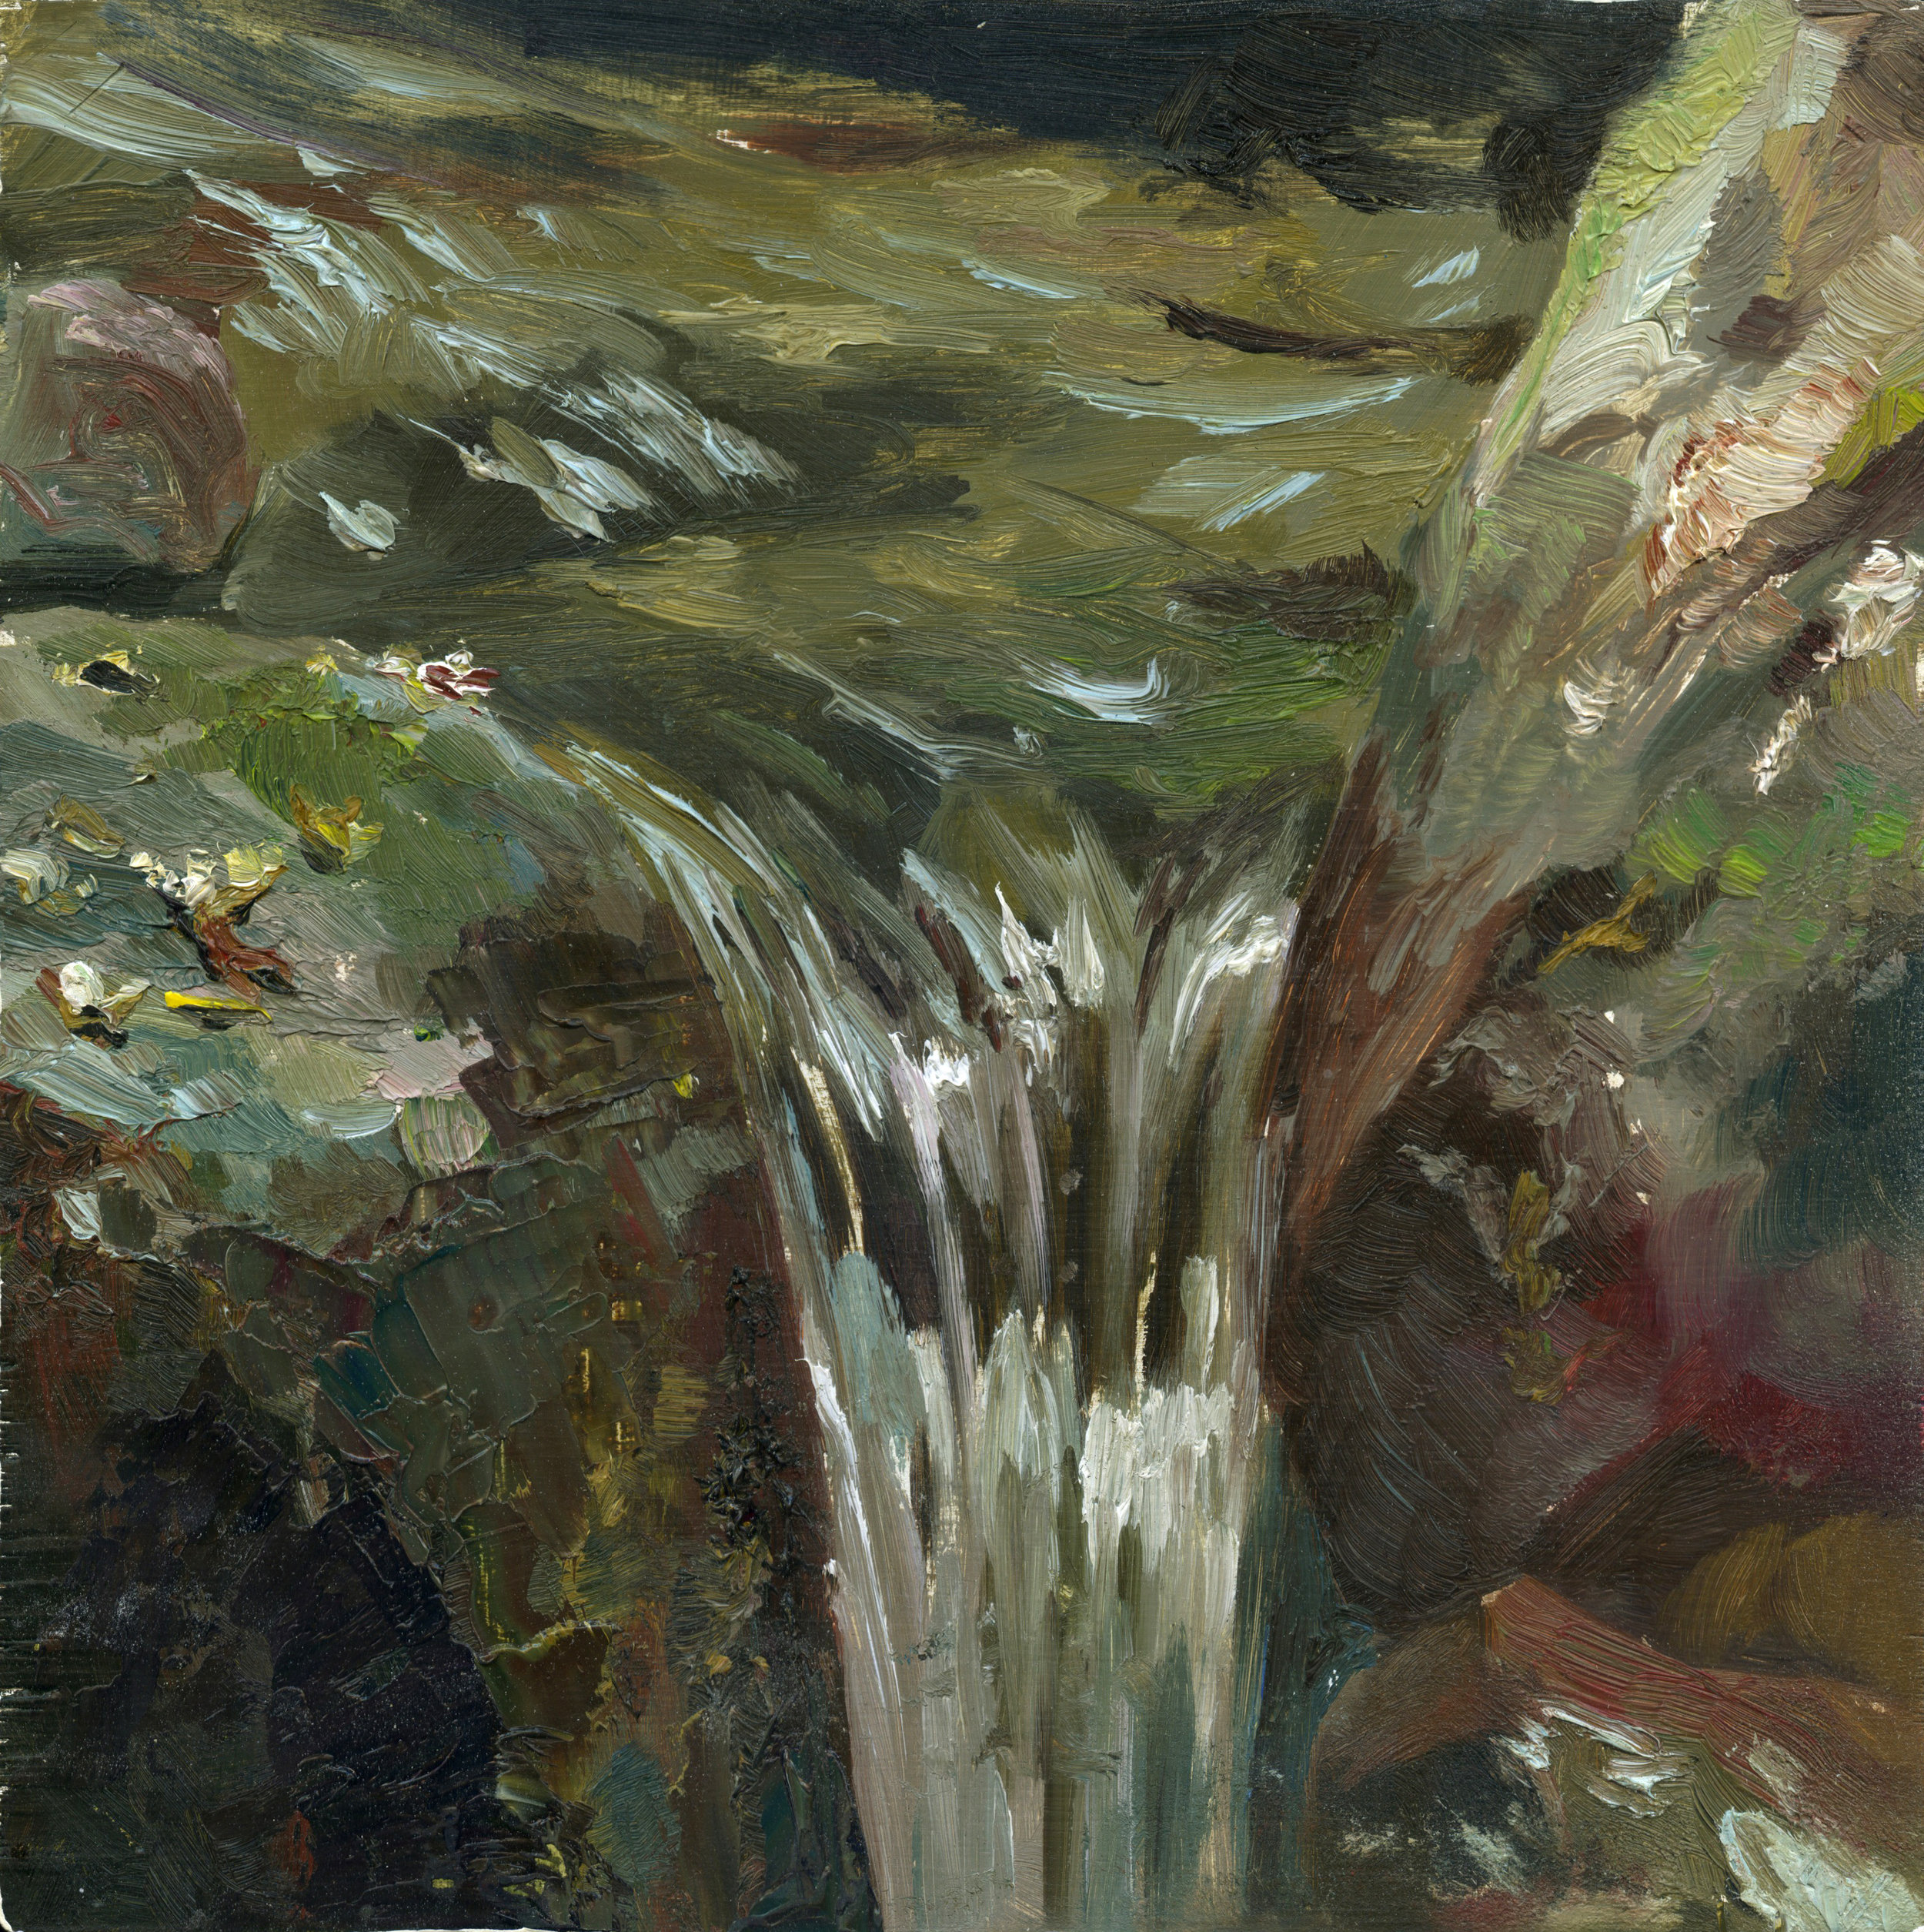 "Overflow" detail of image "Flow" from Dedrick series. Oil on panel. 12x12". 2009